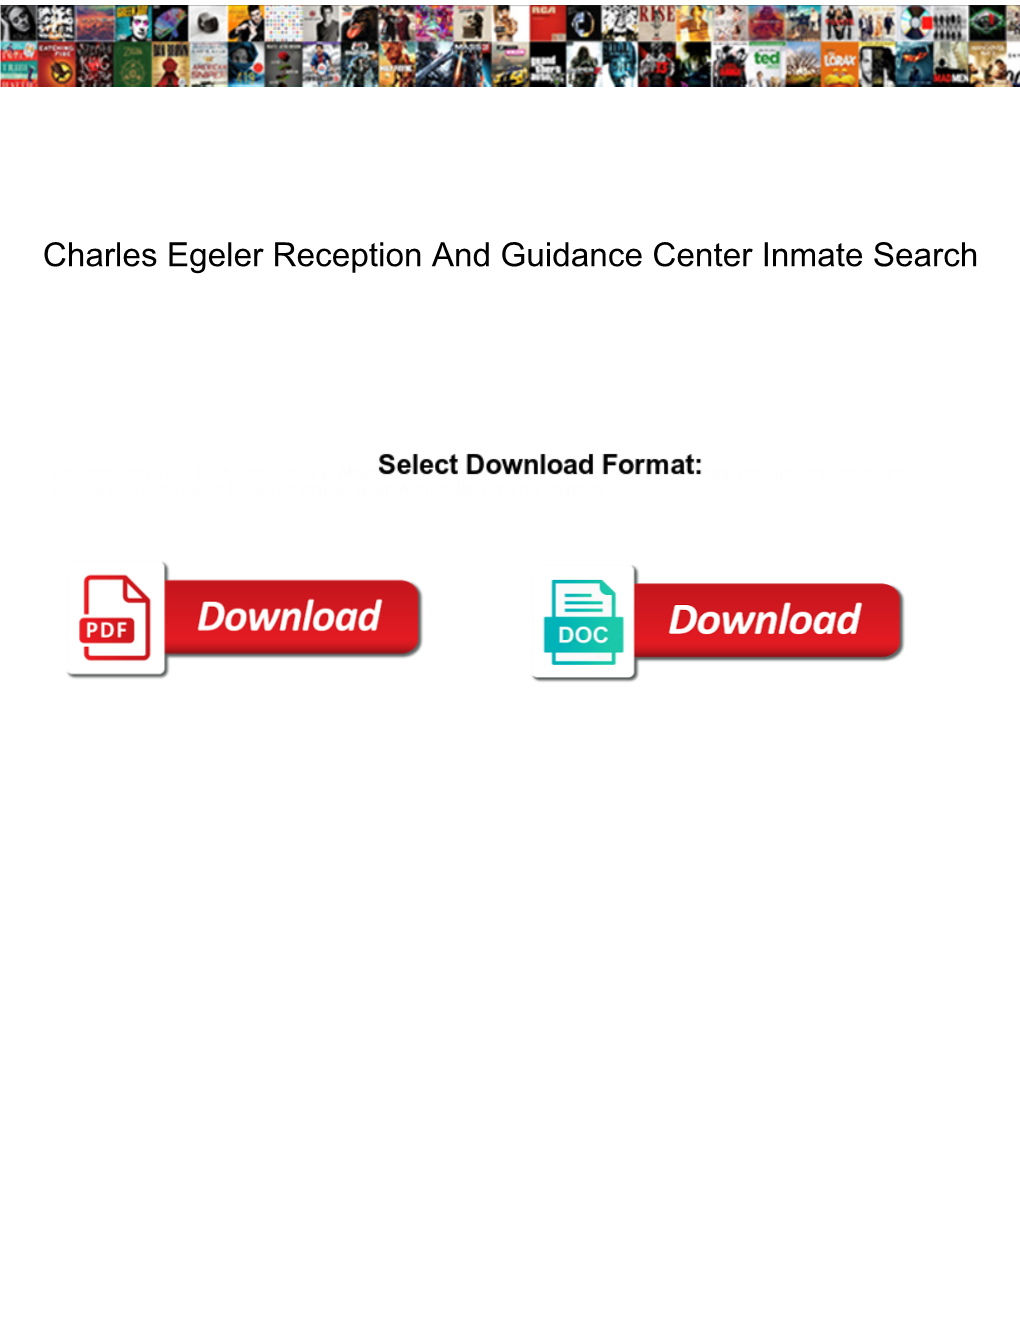 Charles Egeler Reception and Guidance Center Inmate Search